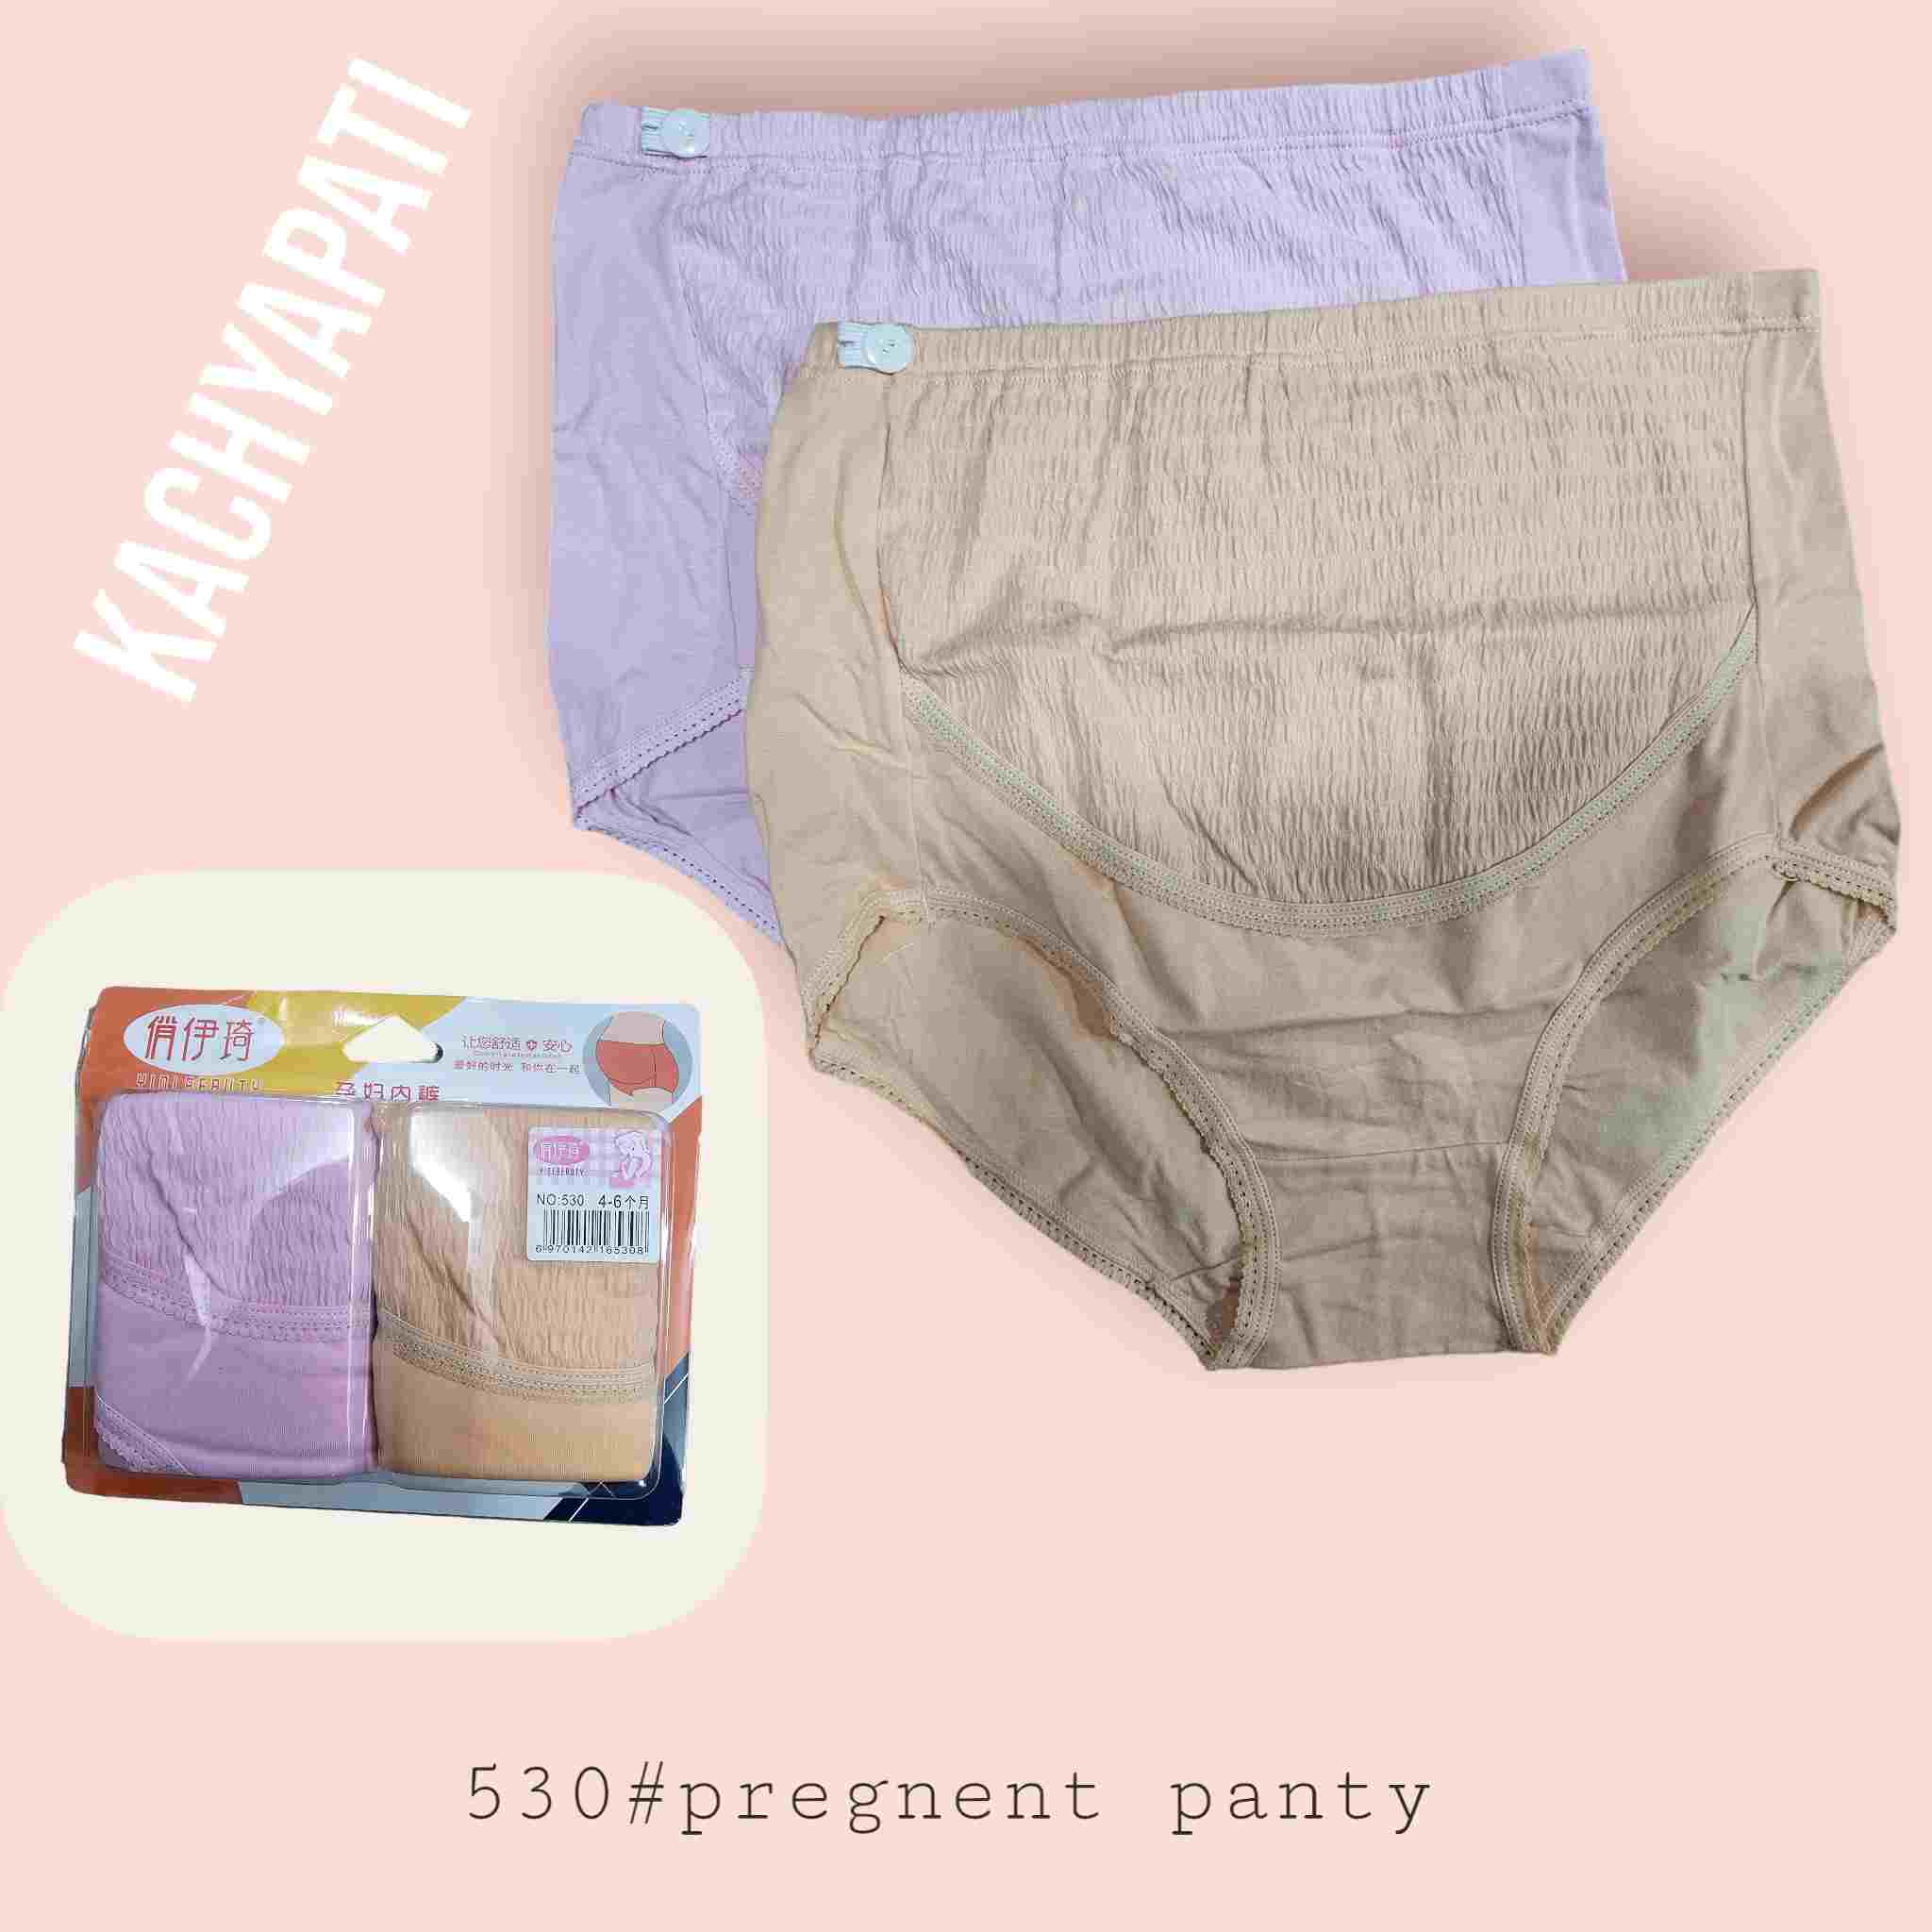 530 pregnent panty